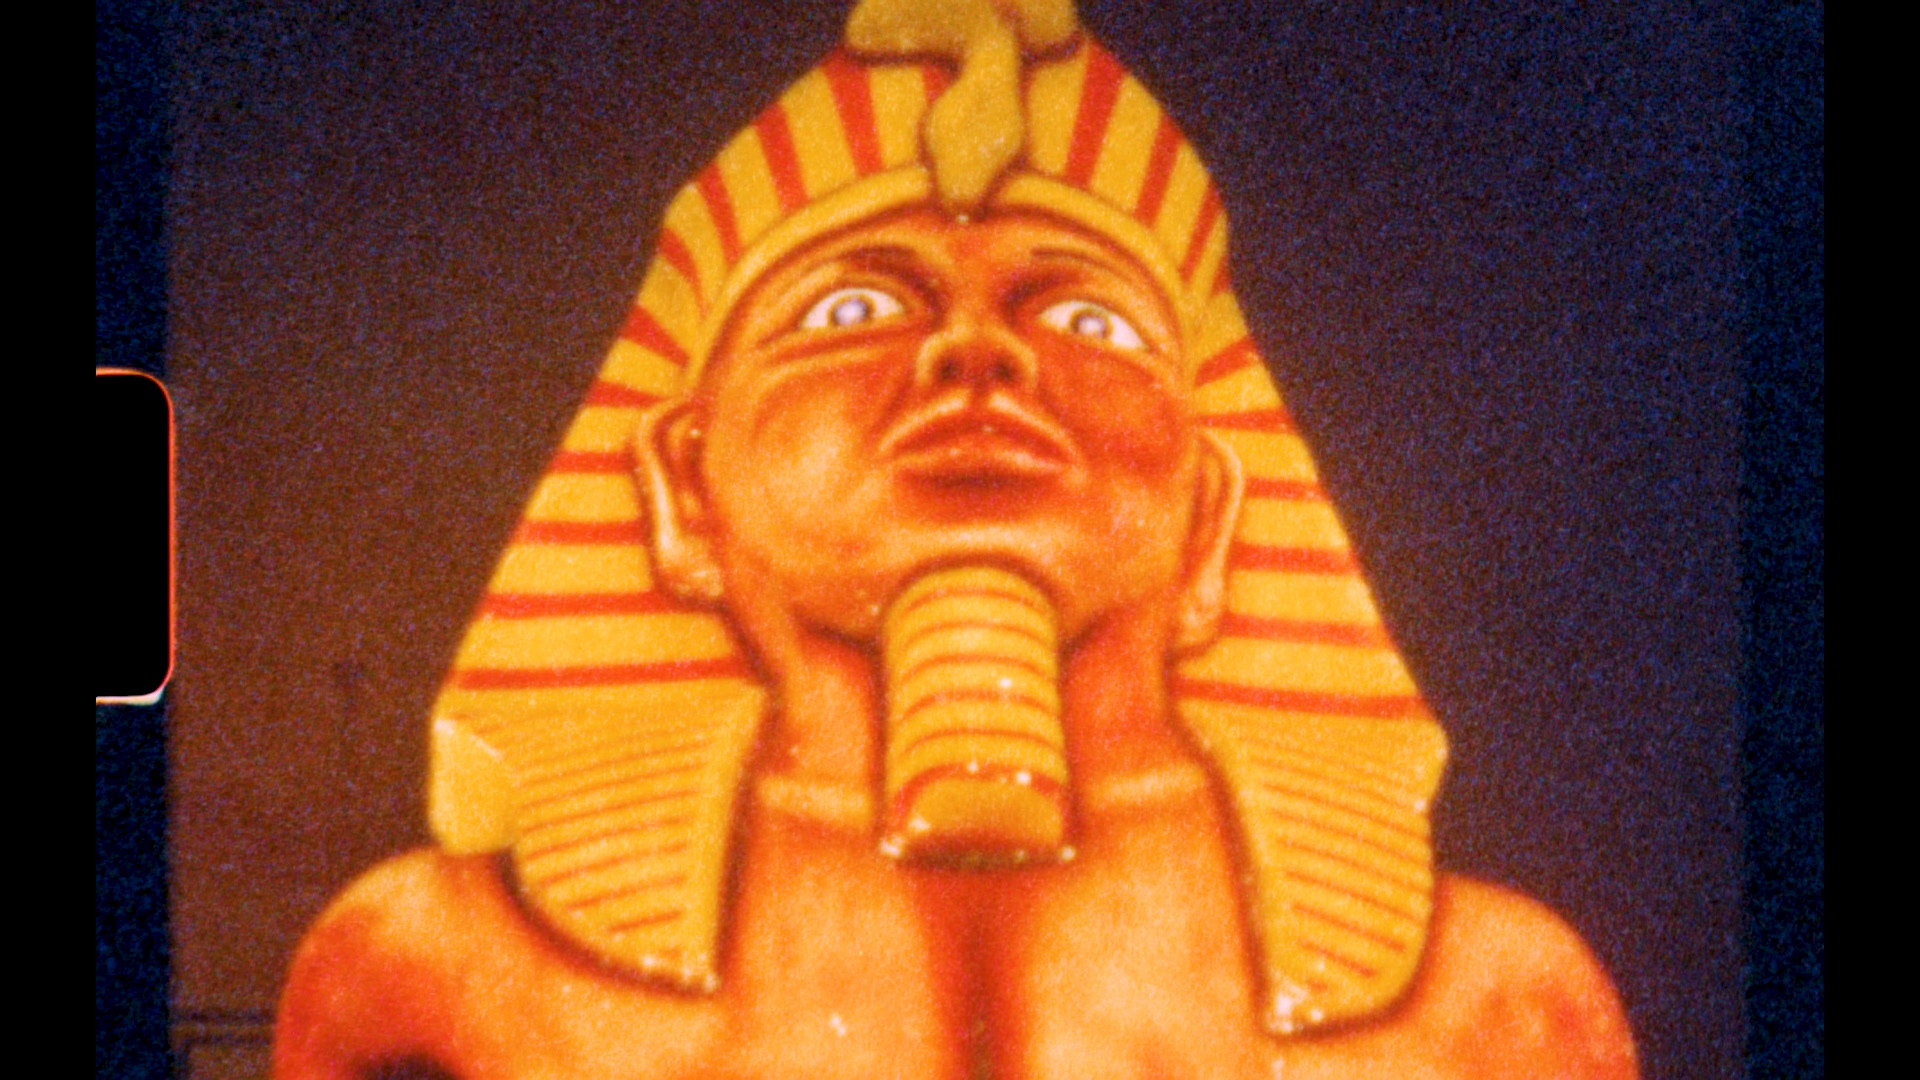 Image of film shown at the gallery from an aliens perspective of the Illuminations and other features of Blackpool's leisure activities. The image shown is an illumination of a Pharaoh.